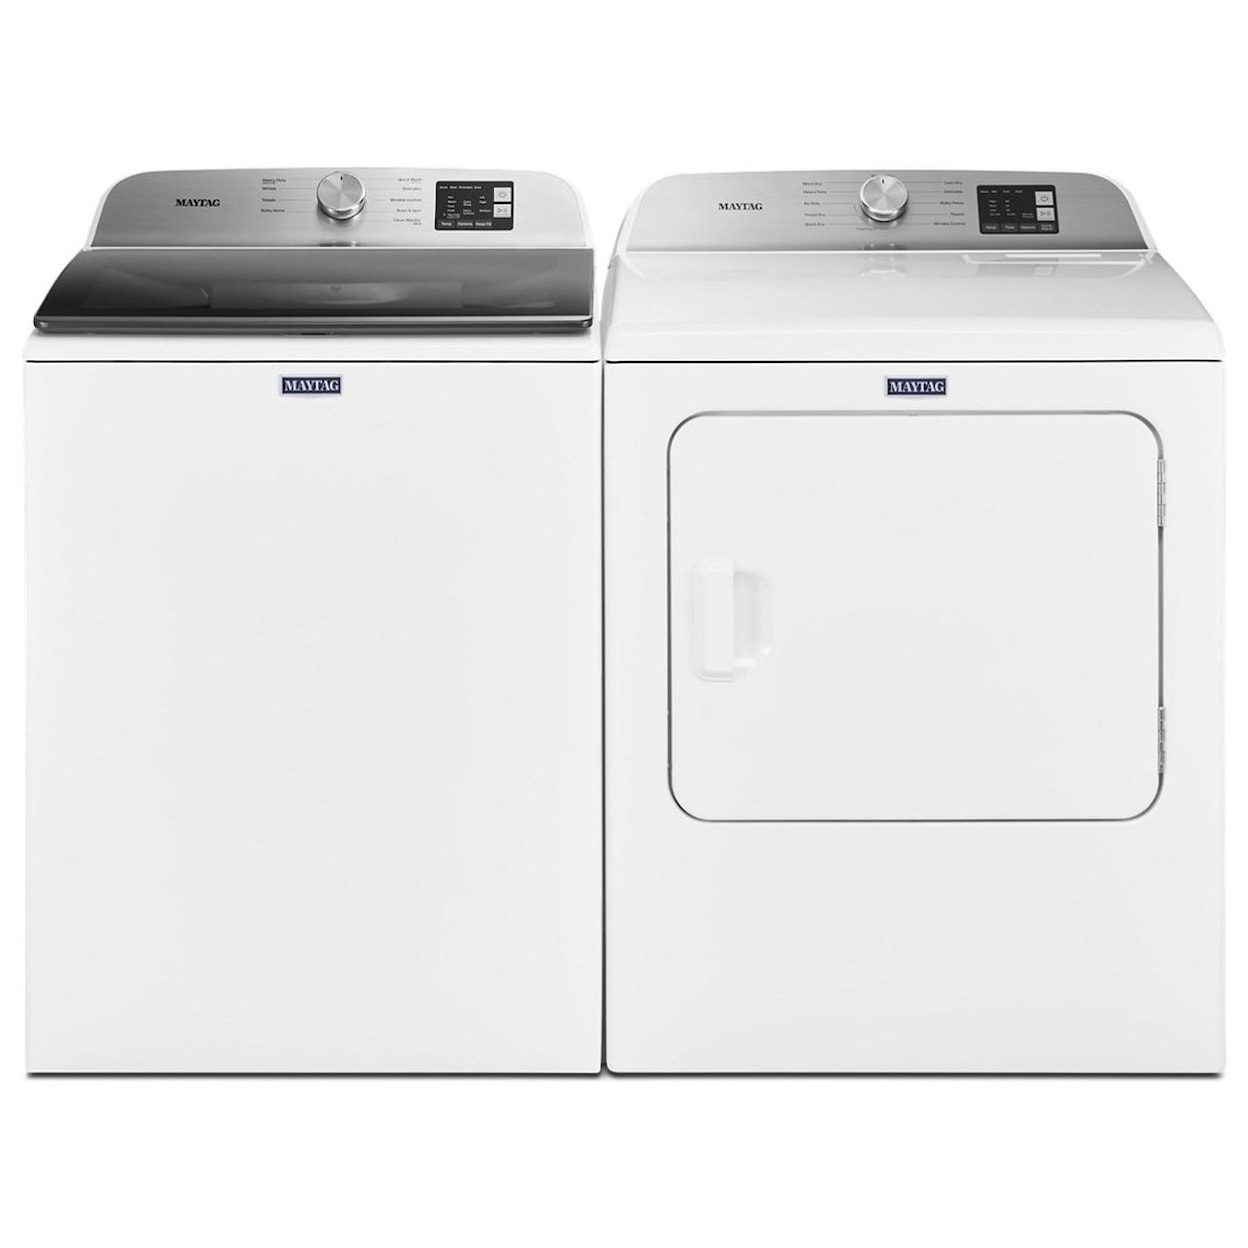 Maytag Front Load Electric Dryers 7.0 CU. FT. Top Load Electric Dryer